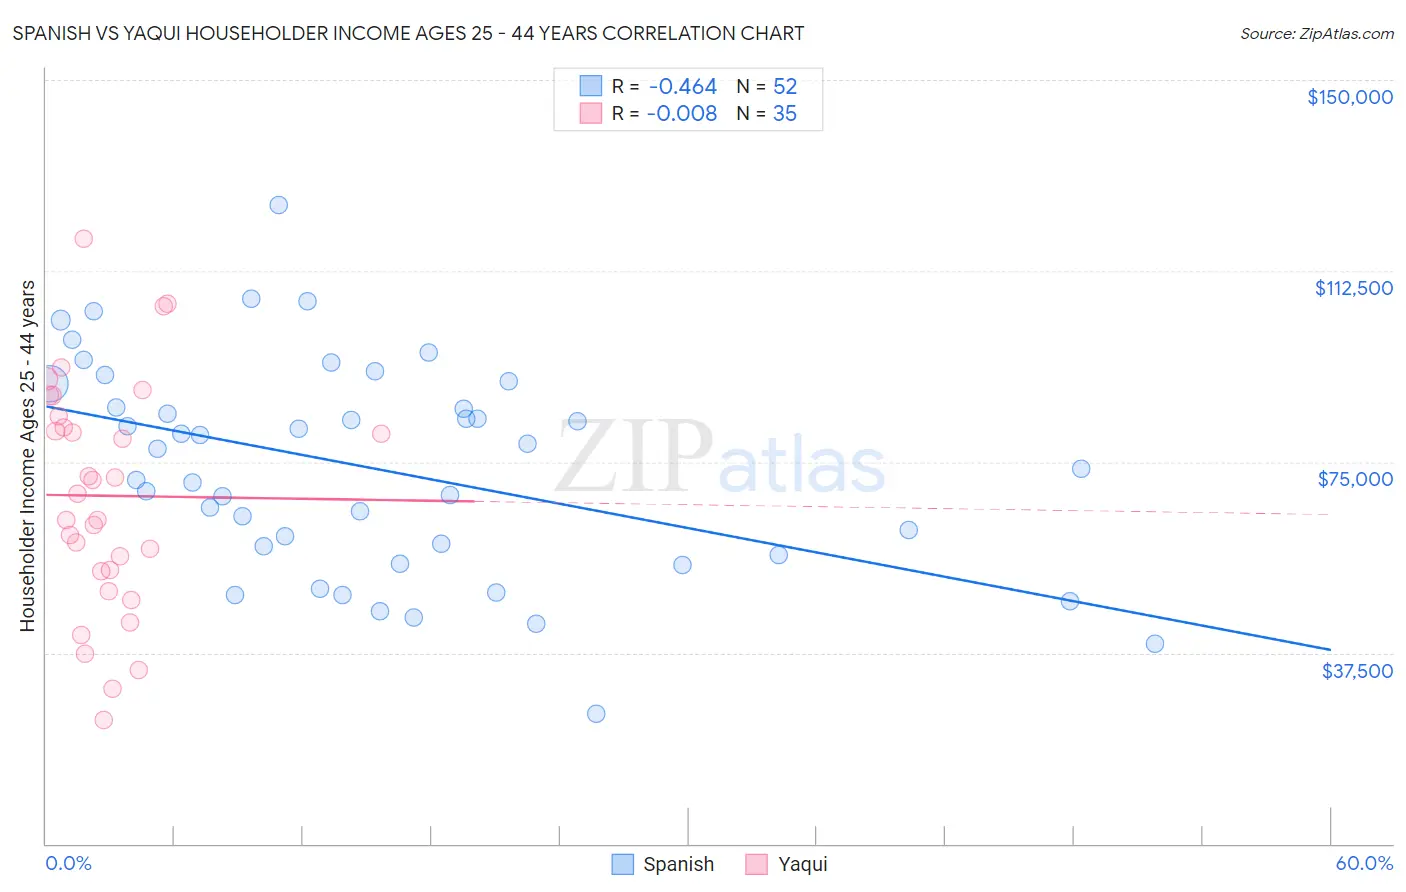 Spanish vs Yaqui Householder Income Ages 25 - 44 years